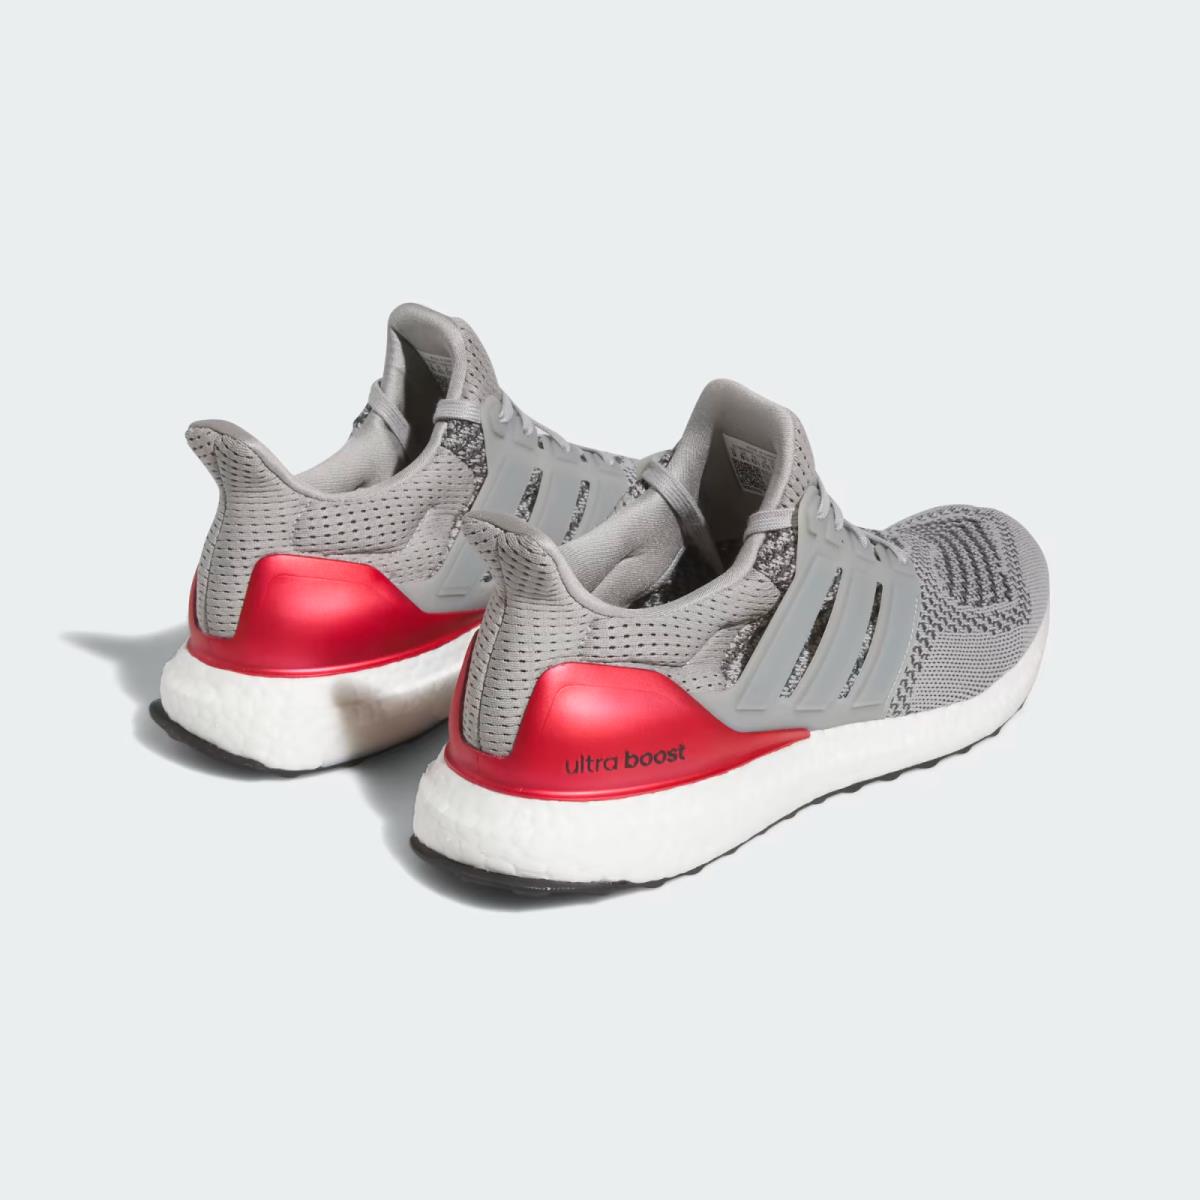 Adidas shoes UltraBoost - Gray 0